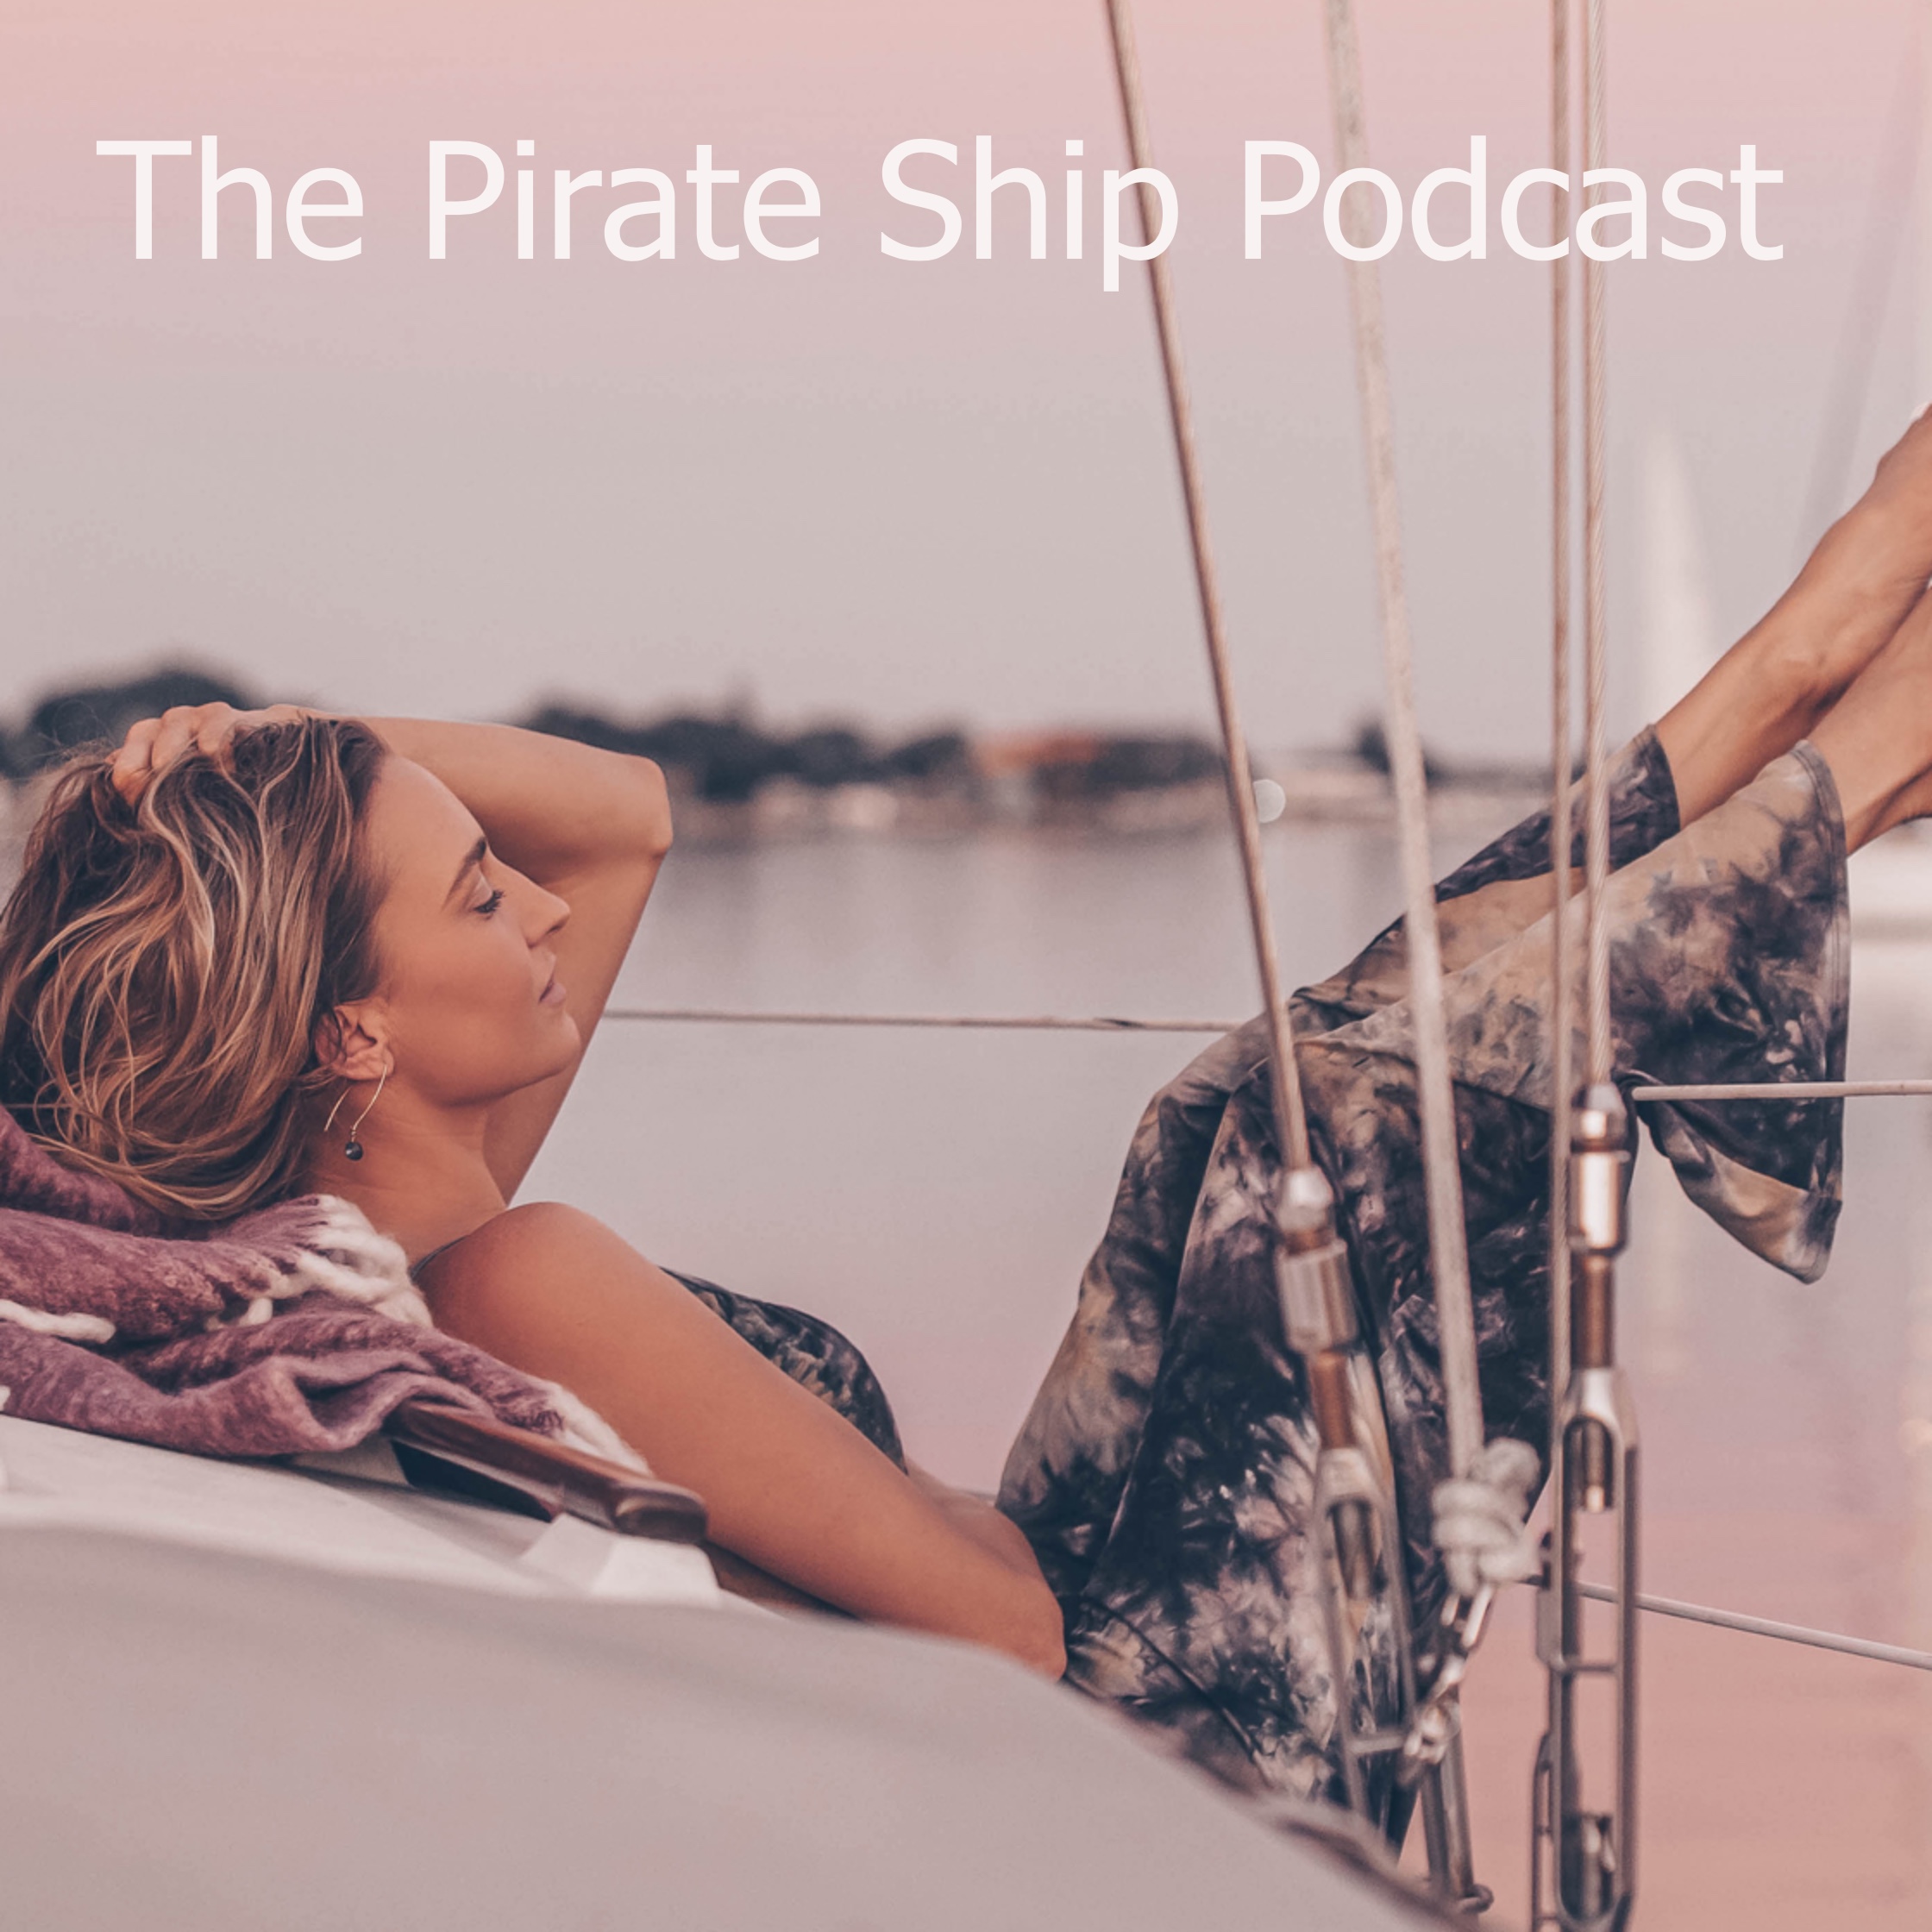 The Pirate Ship Podcast